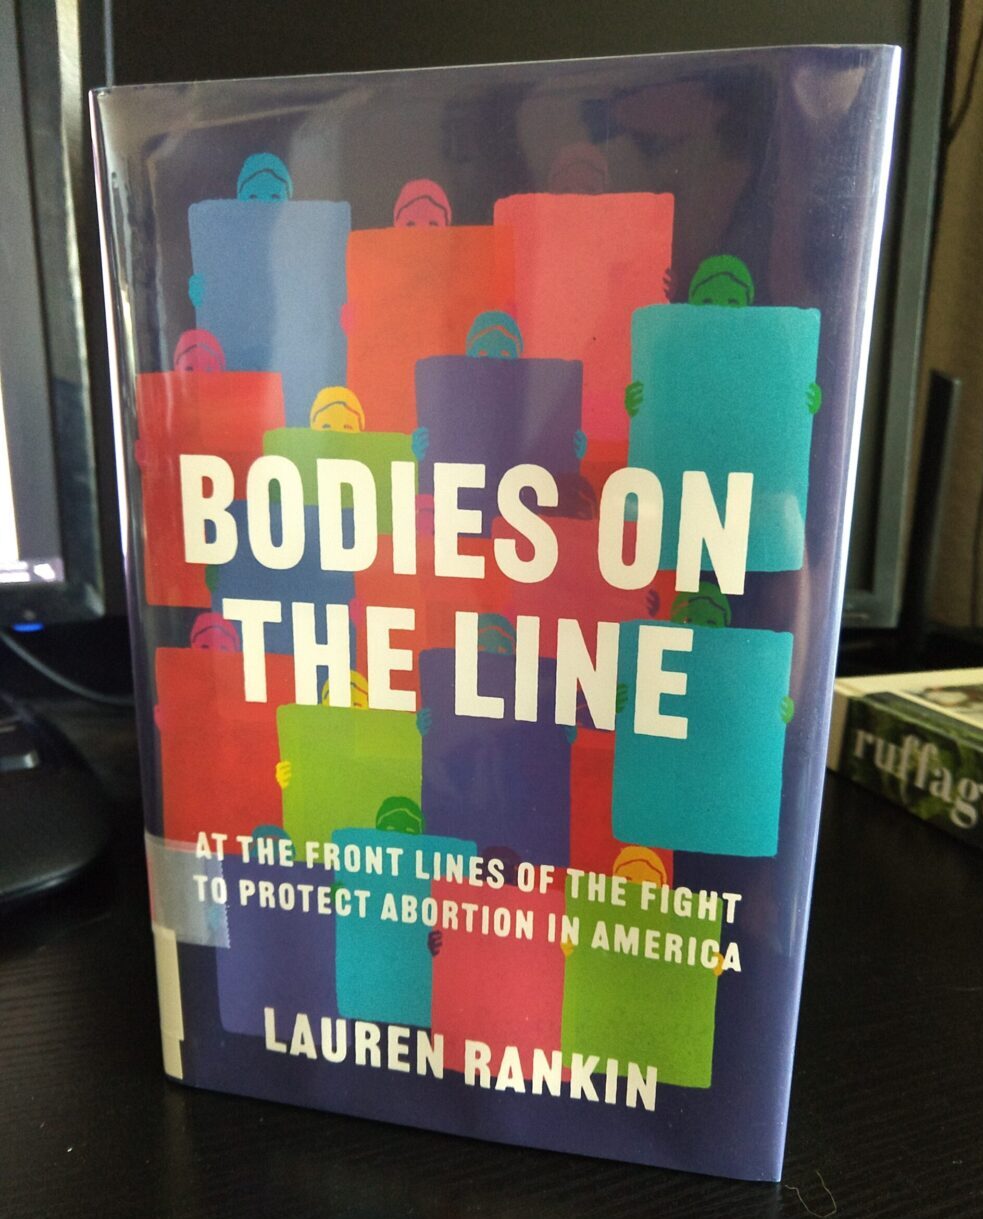 hardcover library book: Bodies on the Line by Lauren Rankin. The cover shows stylized drawings of people hiding behind boards or shields.